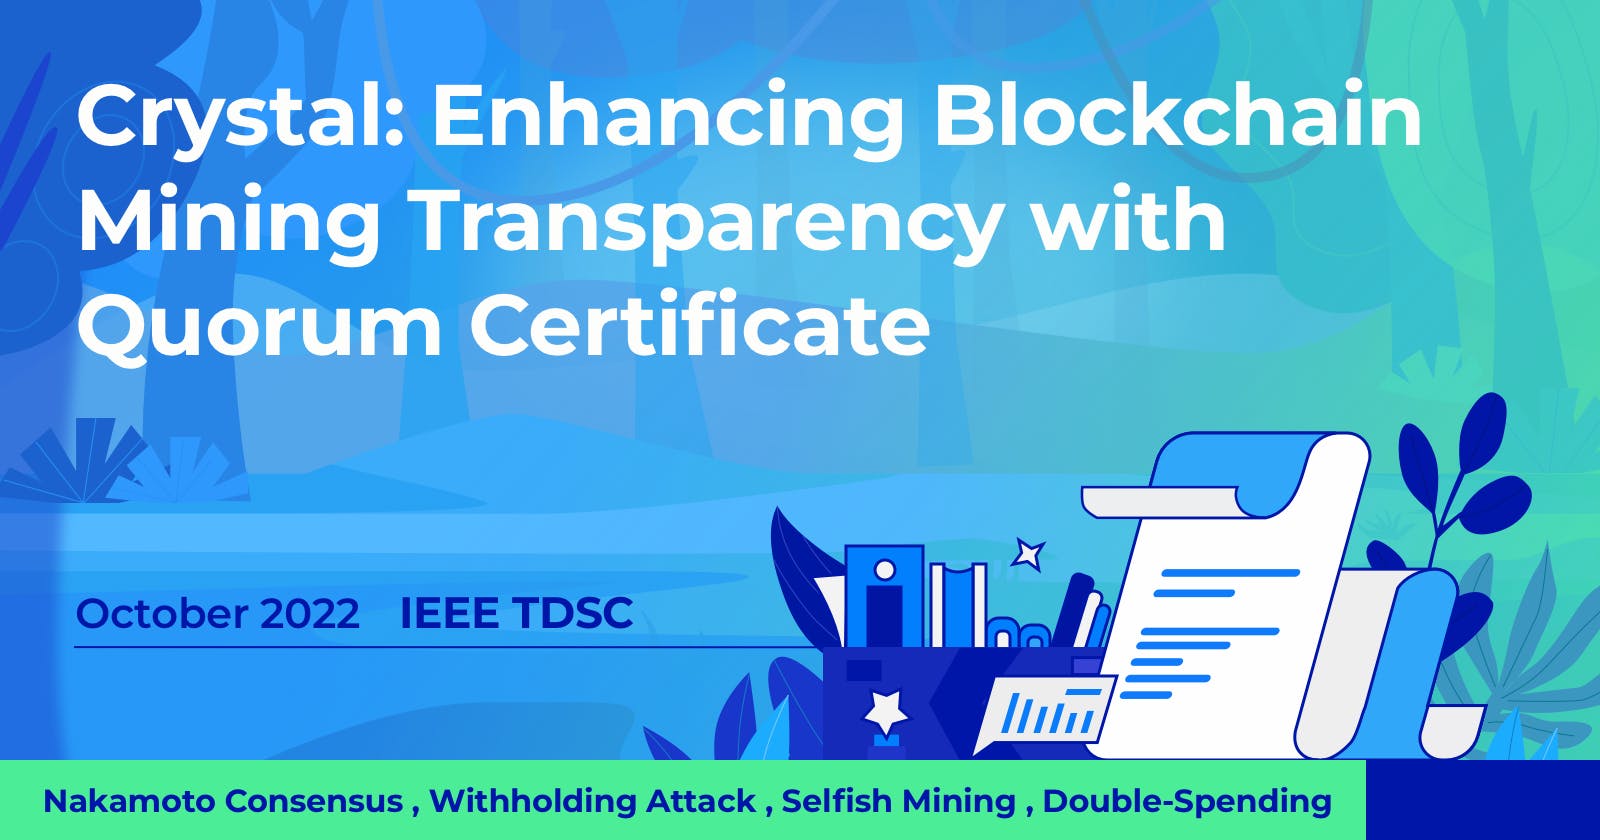 Crystal: Enhancing Blockchain Mining Transparency with Quorum Certificate